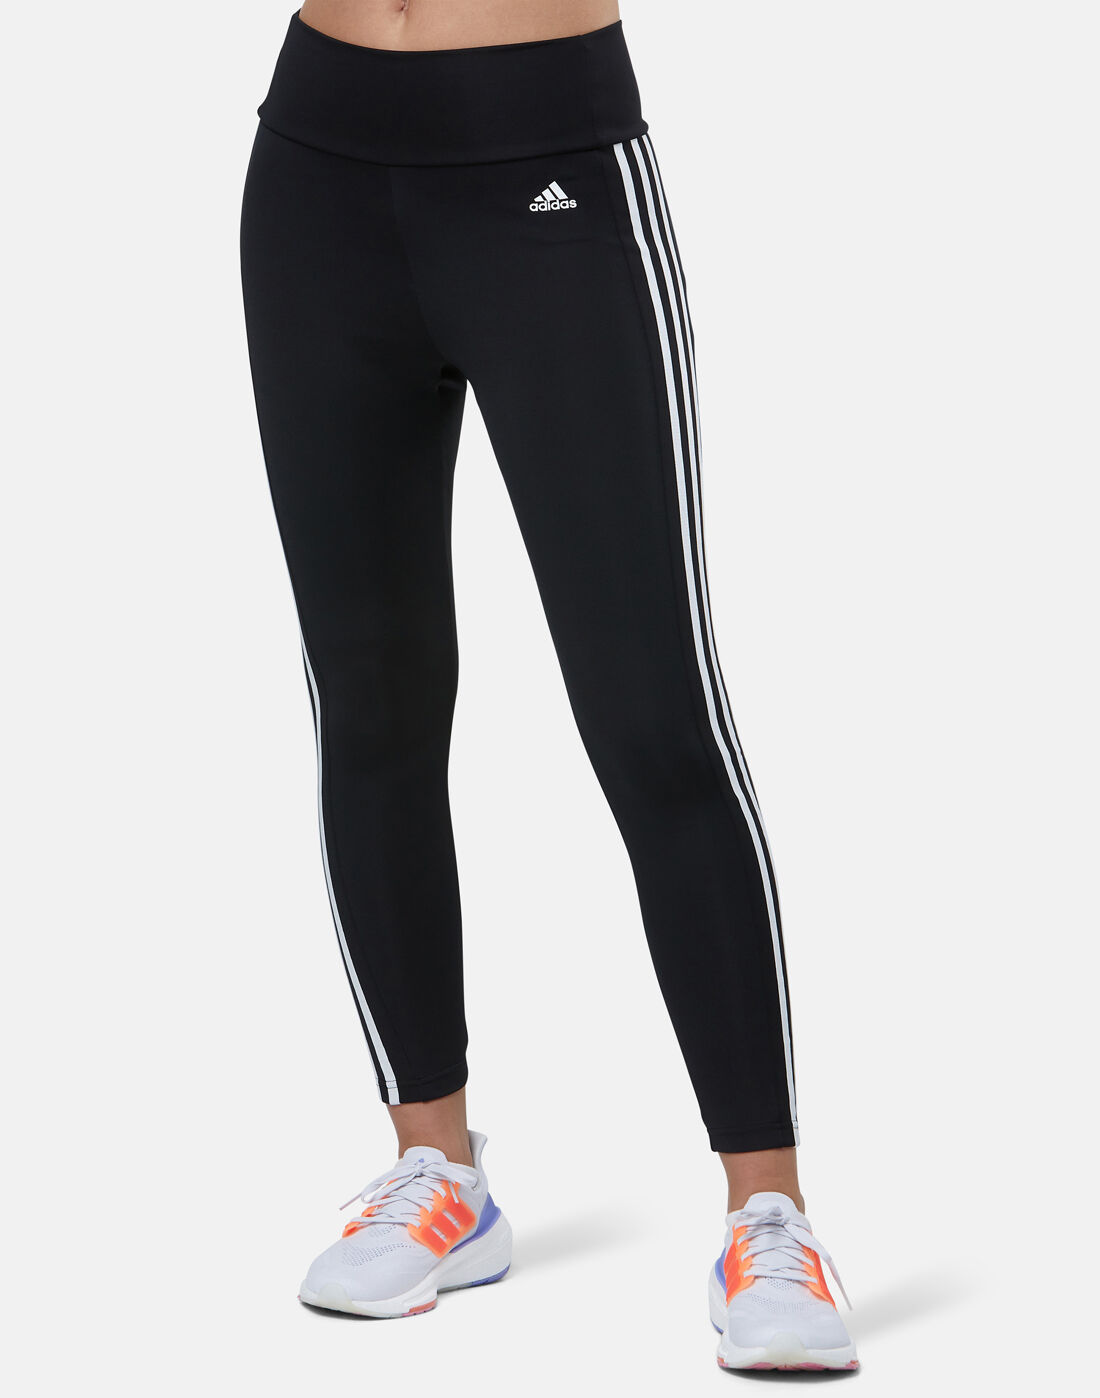 stripes Leggings - adidas showroom in hyderabad india price list - Black |  adidas Womens 3 - adidas zx flux shoes navy blue women pants suit EU